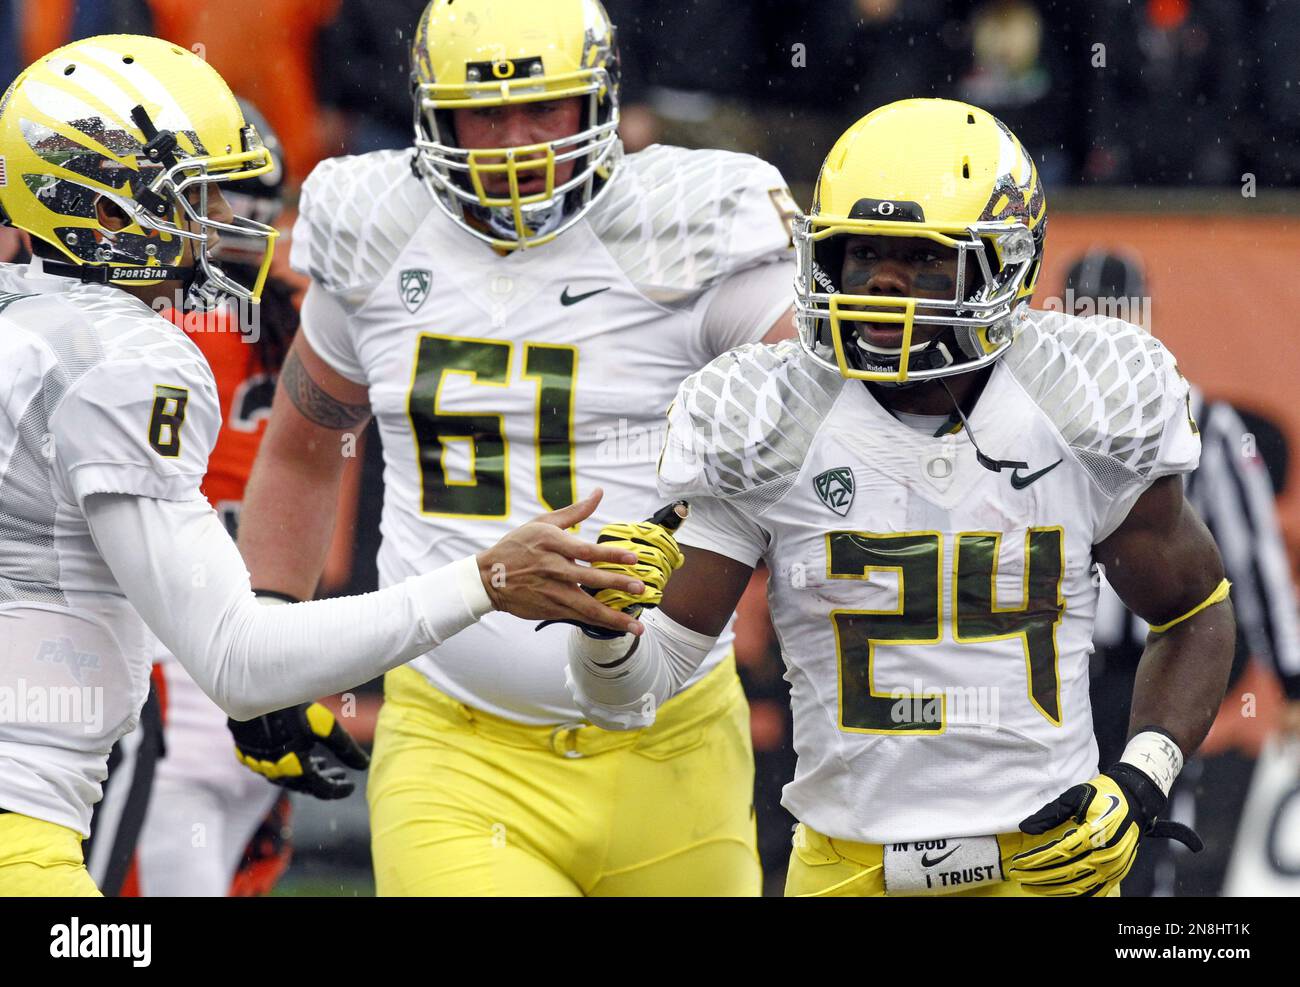 Oregon running back Kenjon Barner, right, is congratulated on his touchdown by quarterback Marcus Mariota during the first half of their NCAA college football game against Oregon State in Corvallis, Ore., Saturday, Nov. 24, 2012. In the background is Oregon's Nick Cody.(AP Photo/Don Ryan) Stock Photo